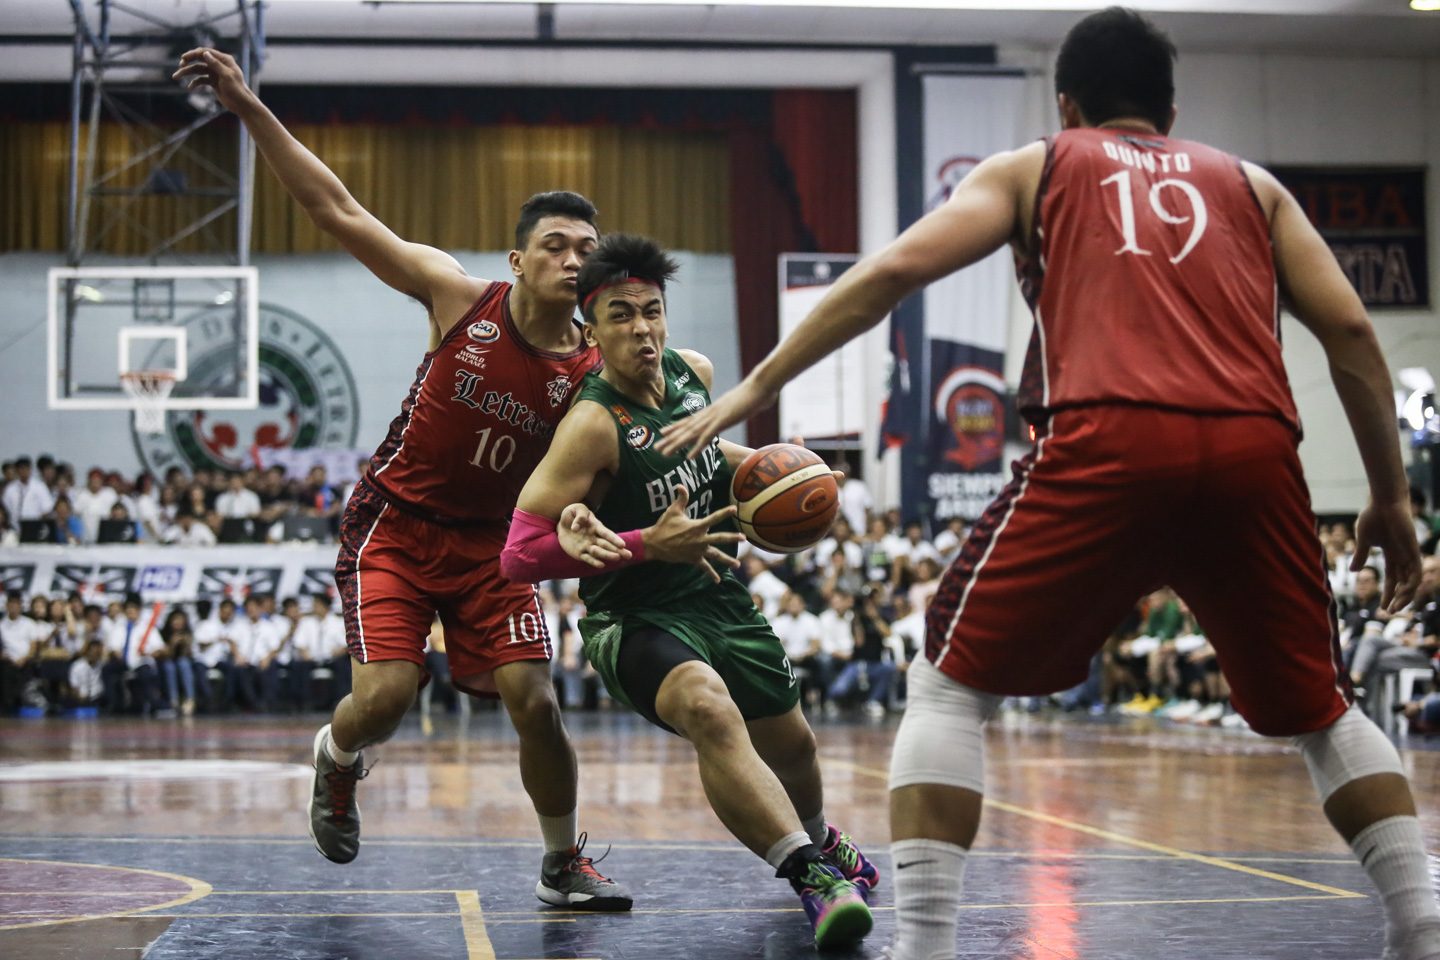 Letran completes comeback over CSB for solo 3rd